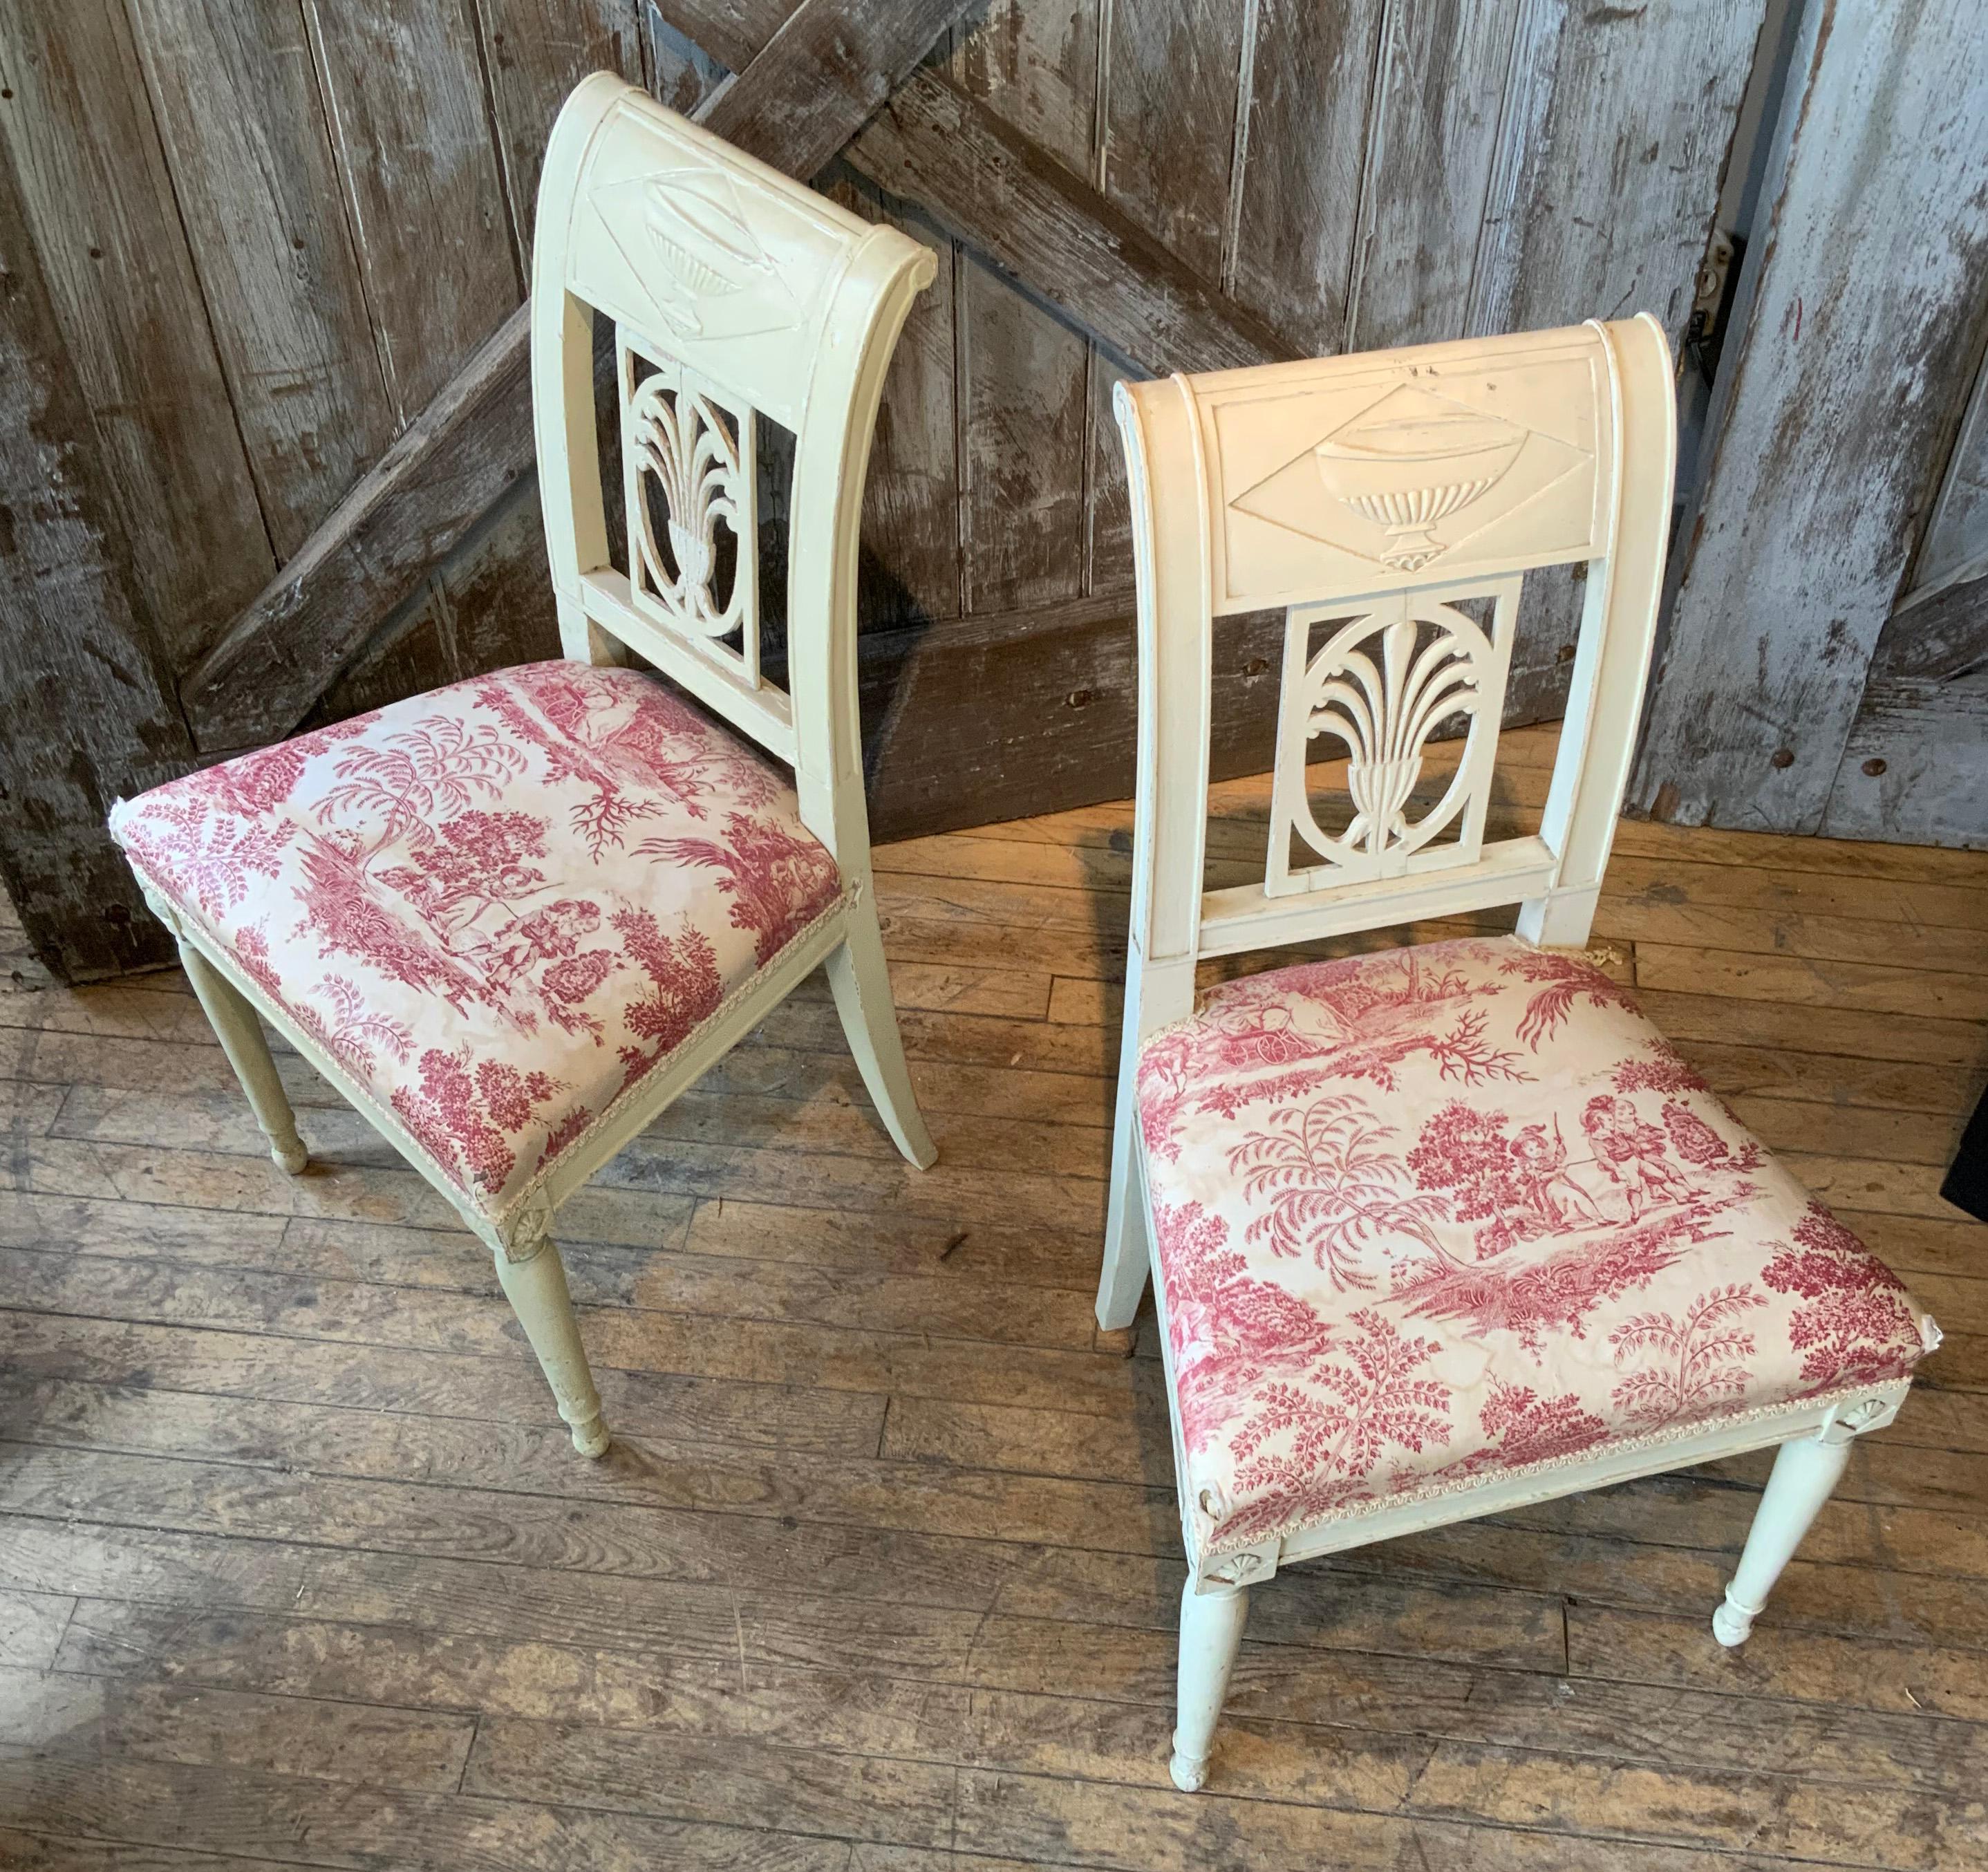 A very nice pair of side chairs from the Harold Brown Villa in Newport RI designed by Ogden Codman. beautifully carved with curved backs and detailed legs. with antique toile upholstery.